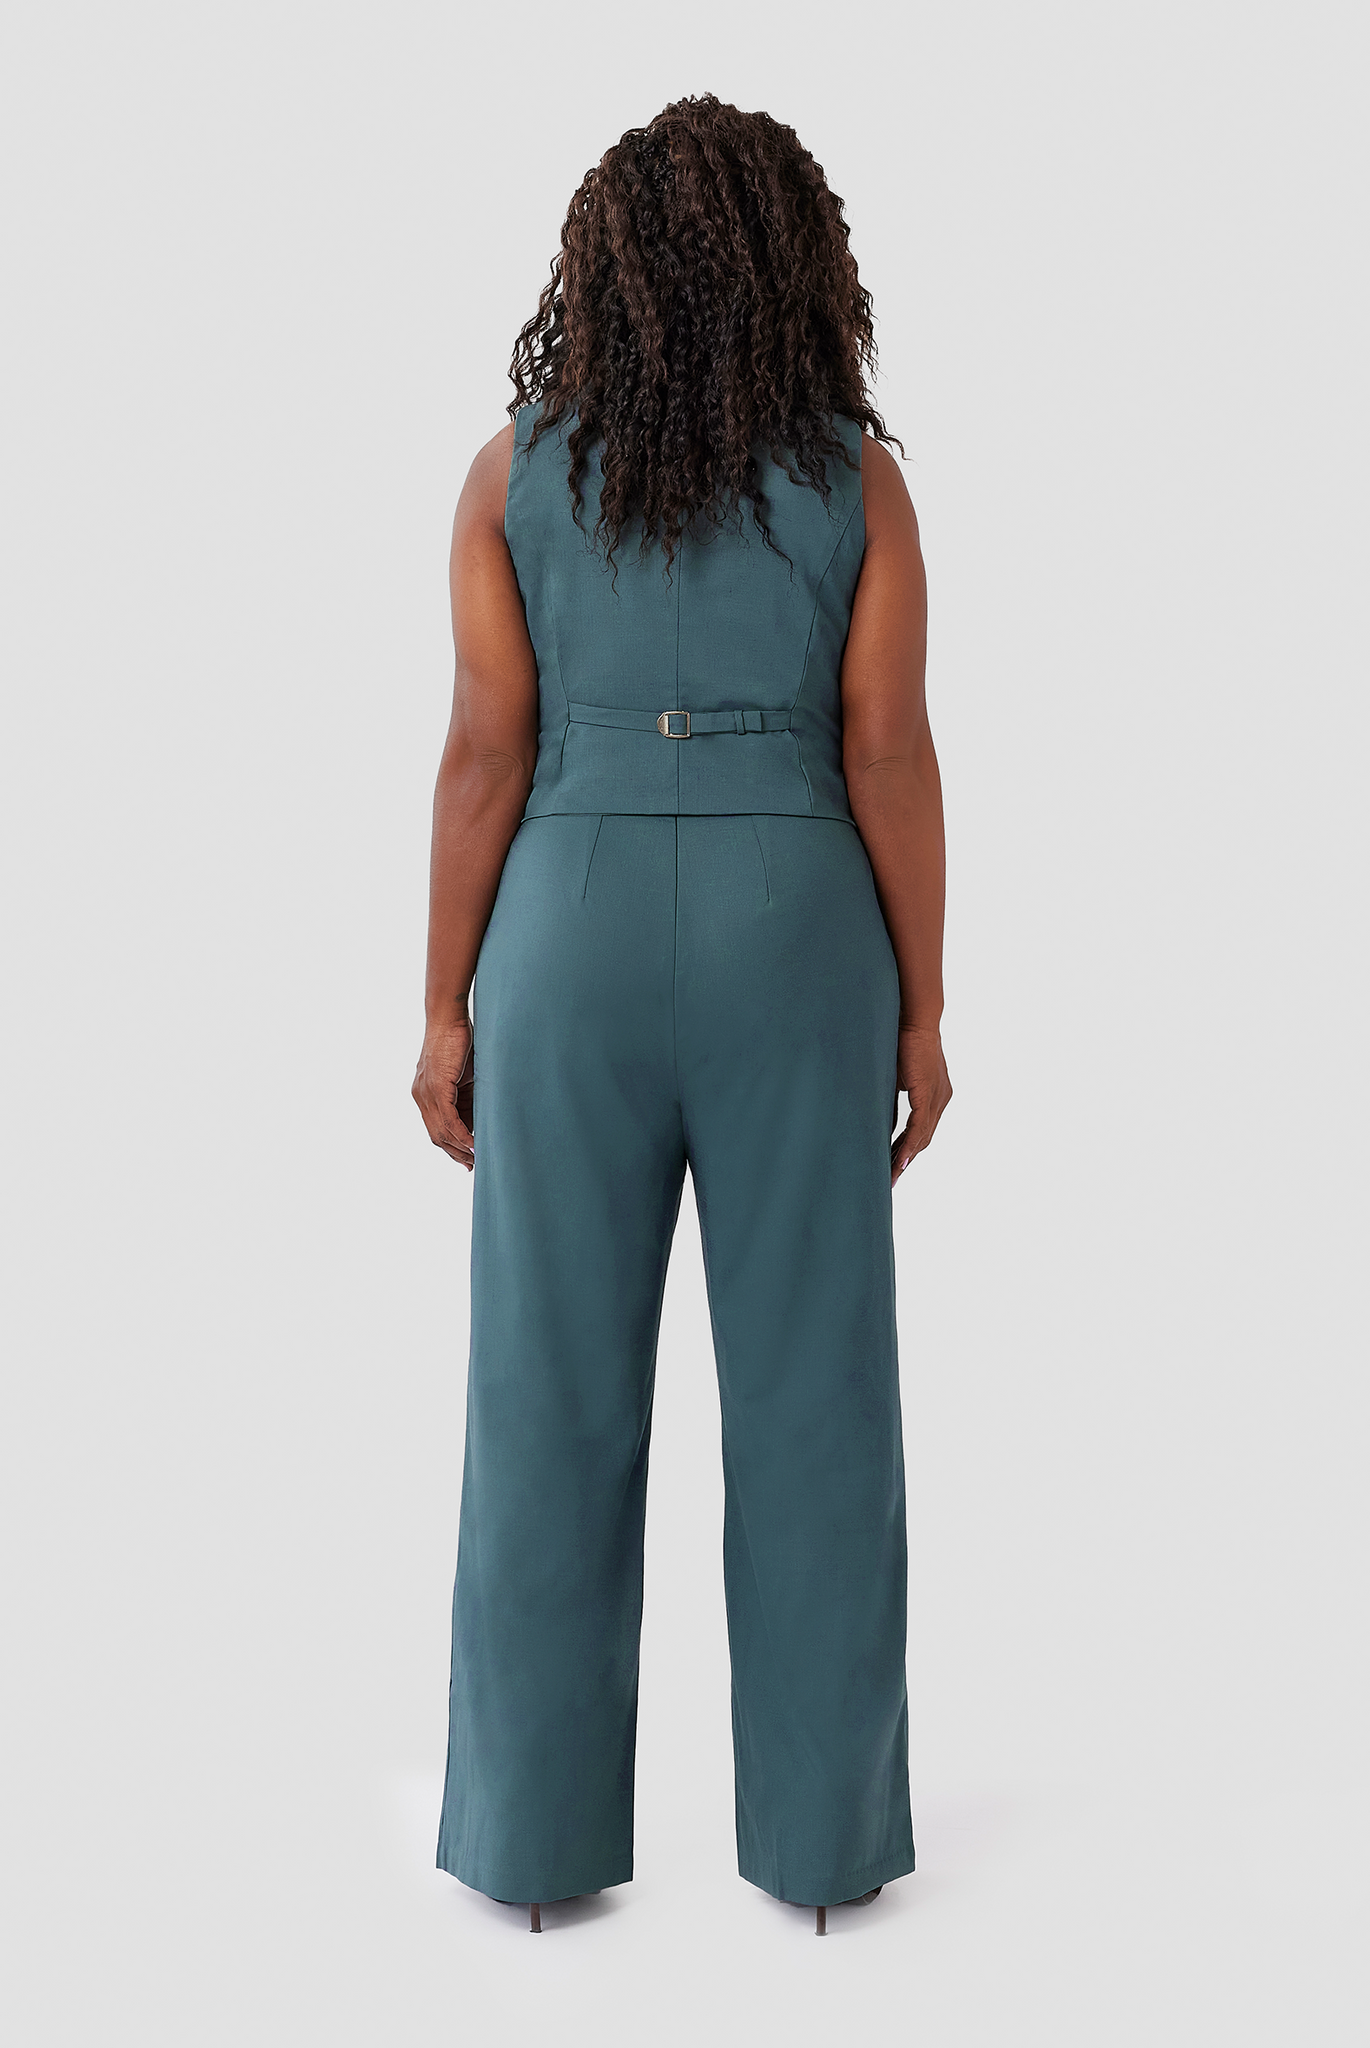 The Wool Wide Leg Pant is designed to sit snug at the high waist with plenty of room for curvy bottom shapes. The pant has a comfortable, boho fit on women with full hips and thighs. No more waist gaps or uncomfortable belts required.